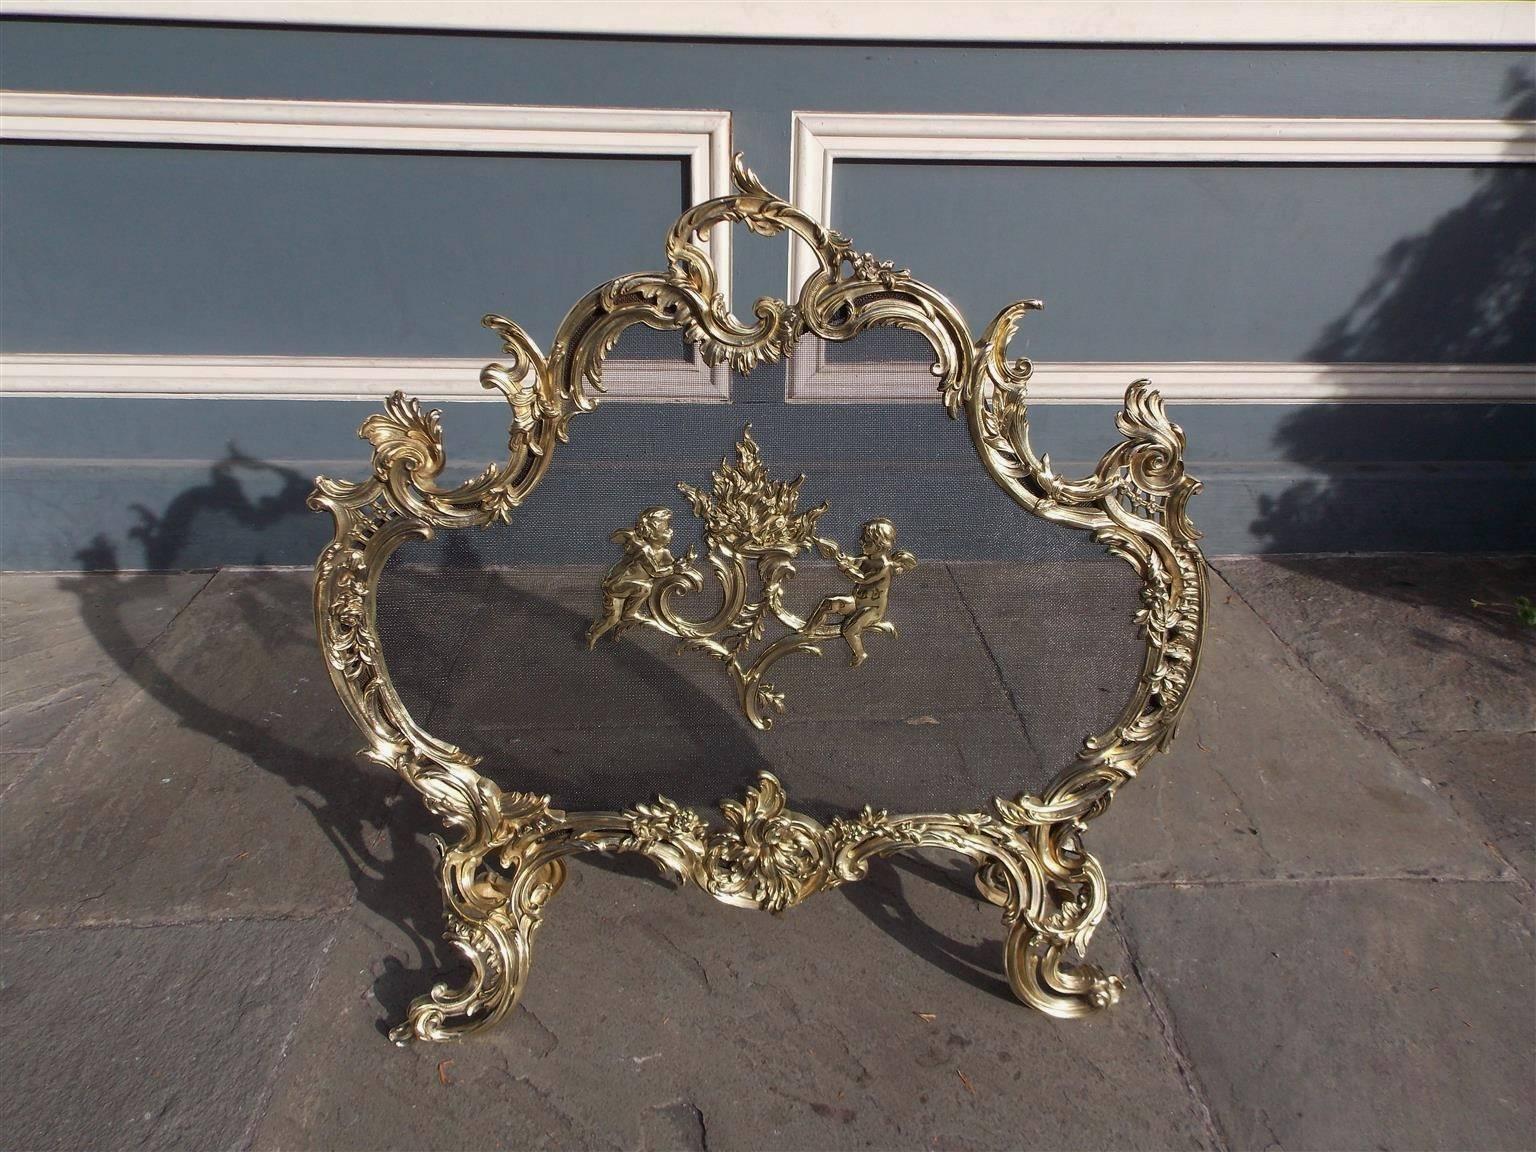 French brass free standing fire screen with flanking cherubs tending to a flame medallion, centered floral acanthus handle, scrolled filigree sides, and terminating on scrolled floral decorative motif feet.  Early 19th Century.  